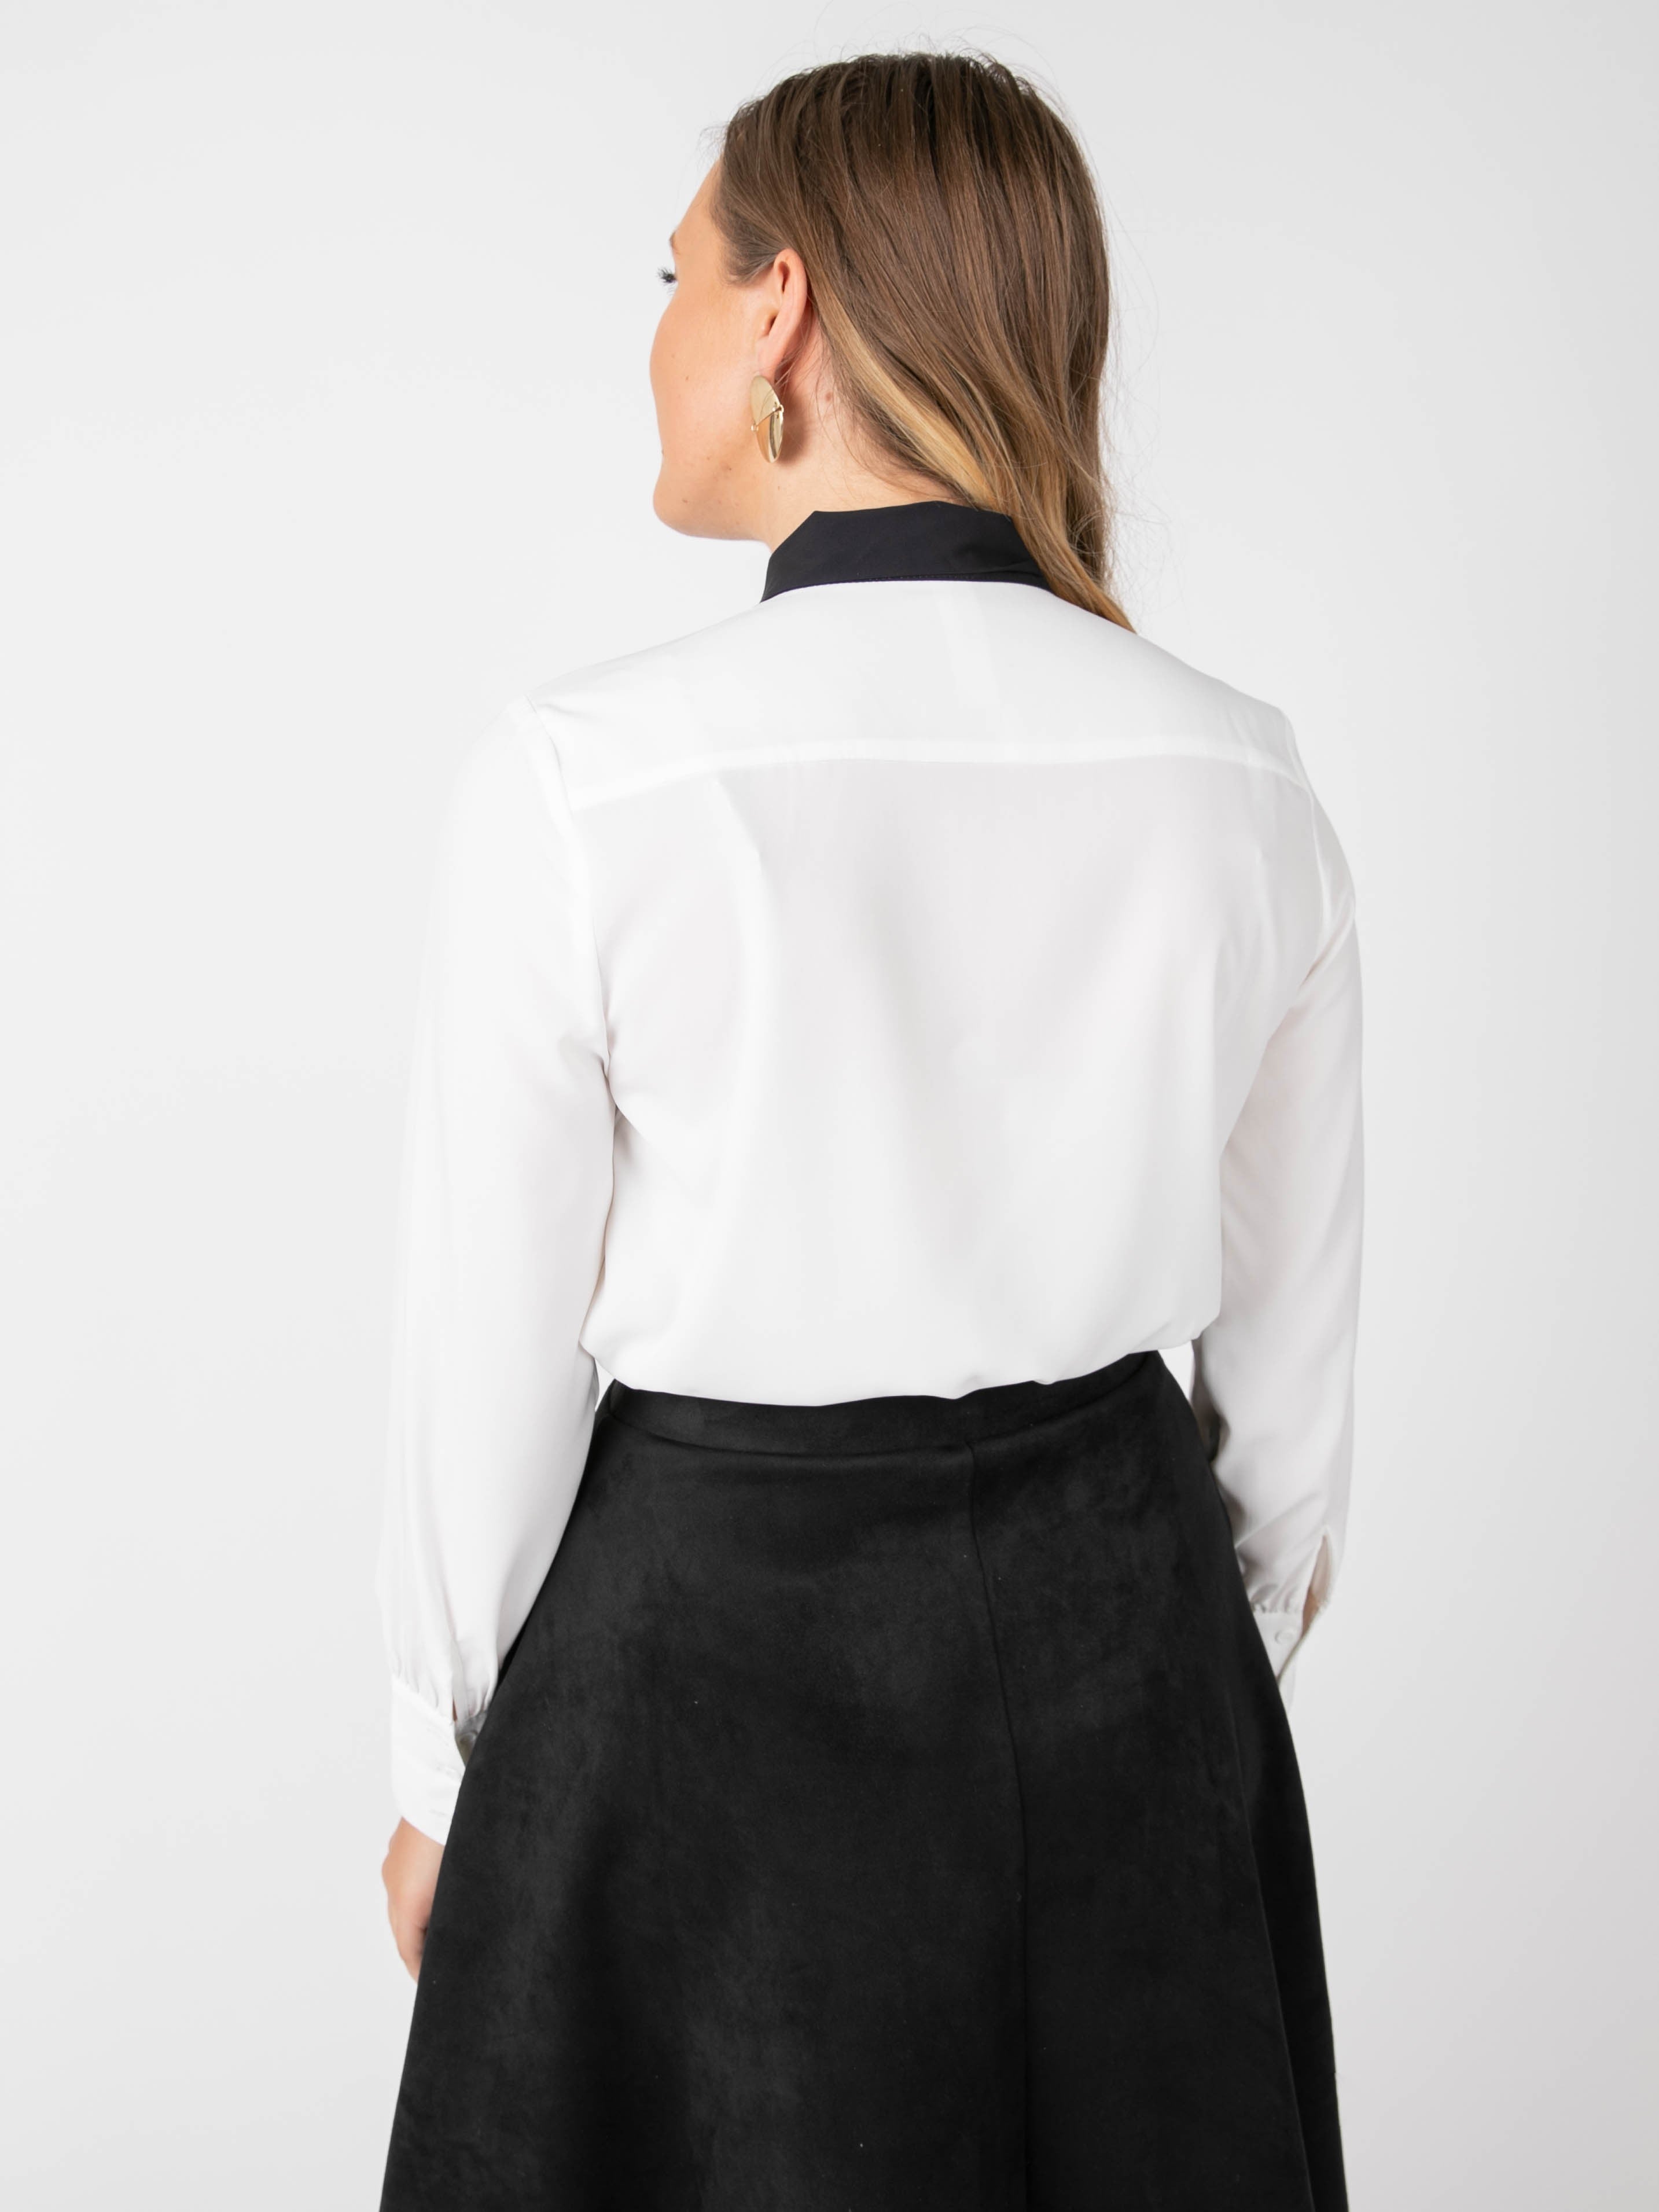 Tie Bow Neck Blouse in Ivory